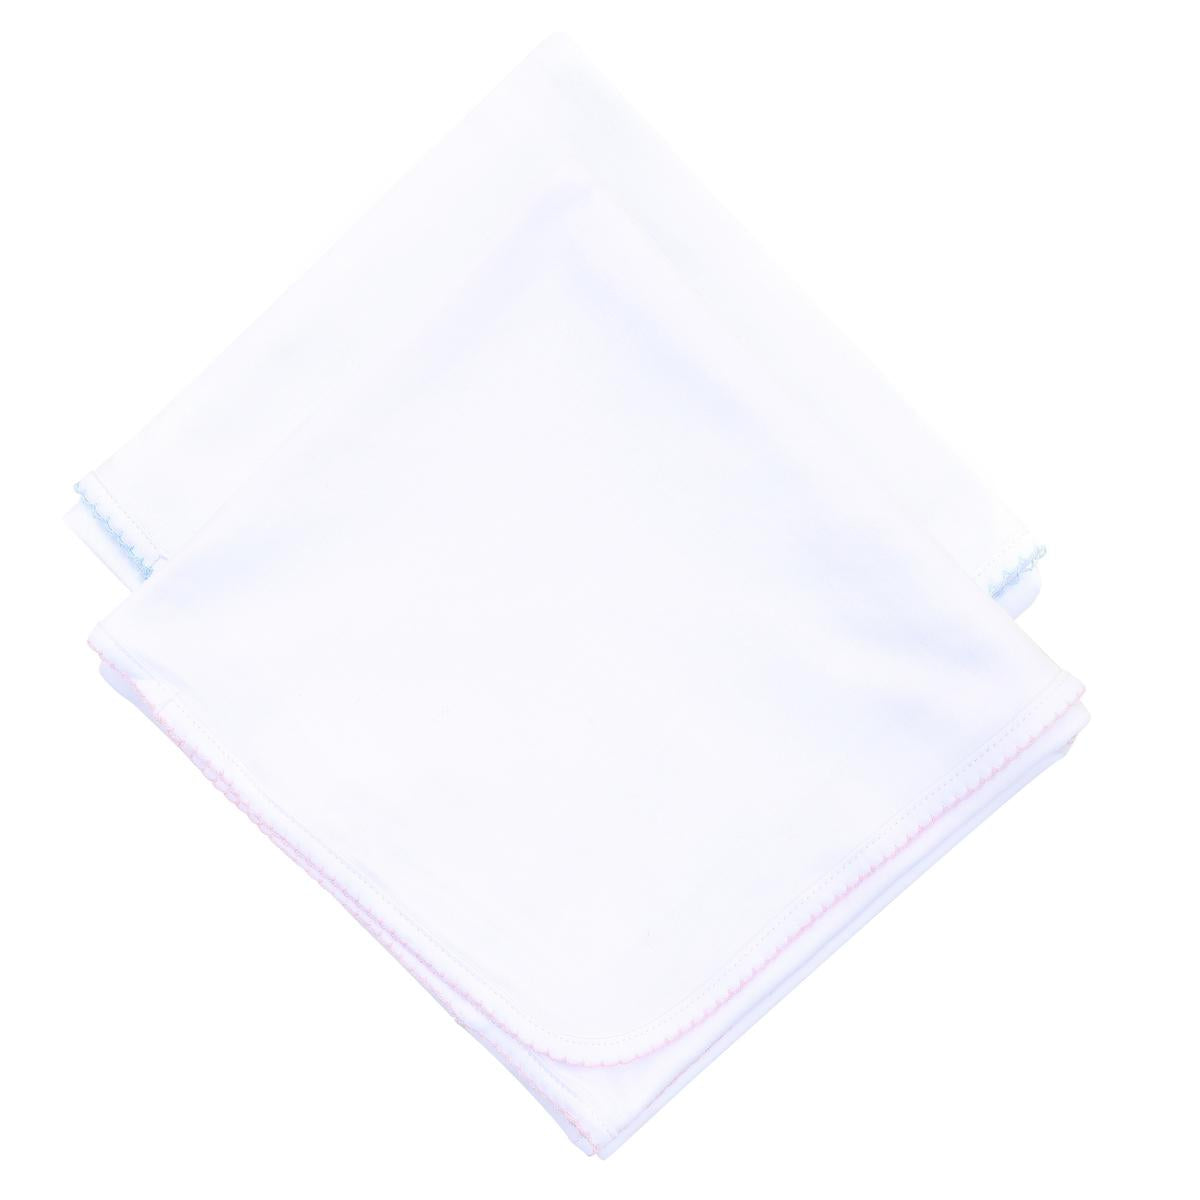 Magnolia Baby Essentials Blanket - White with Light Blue